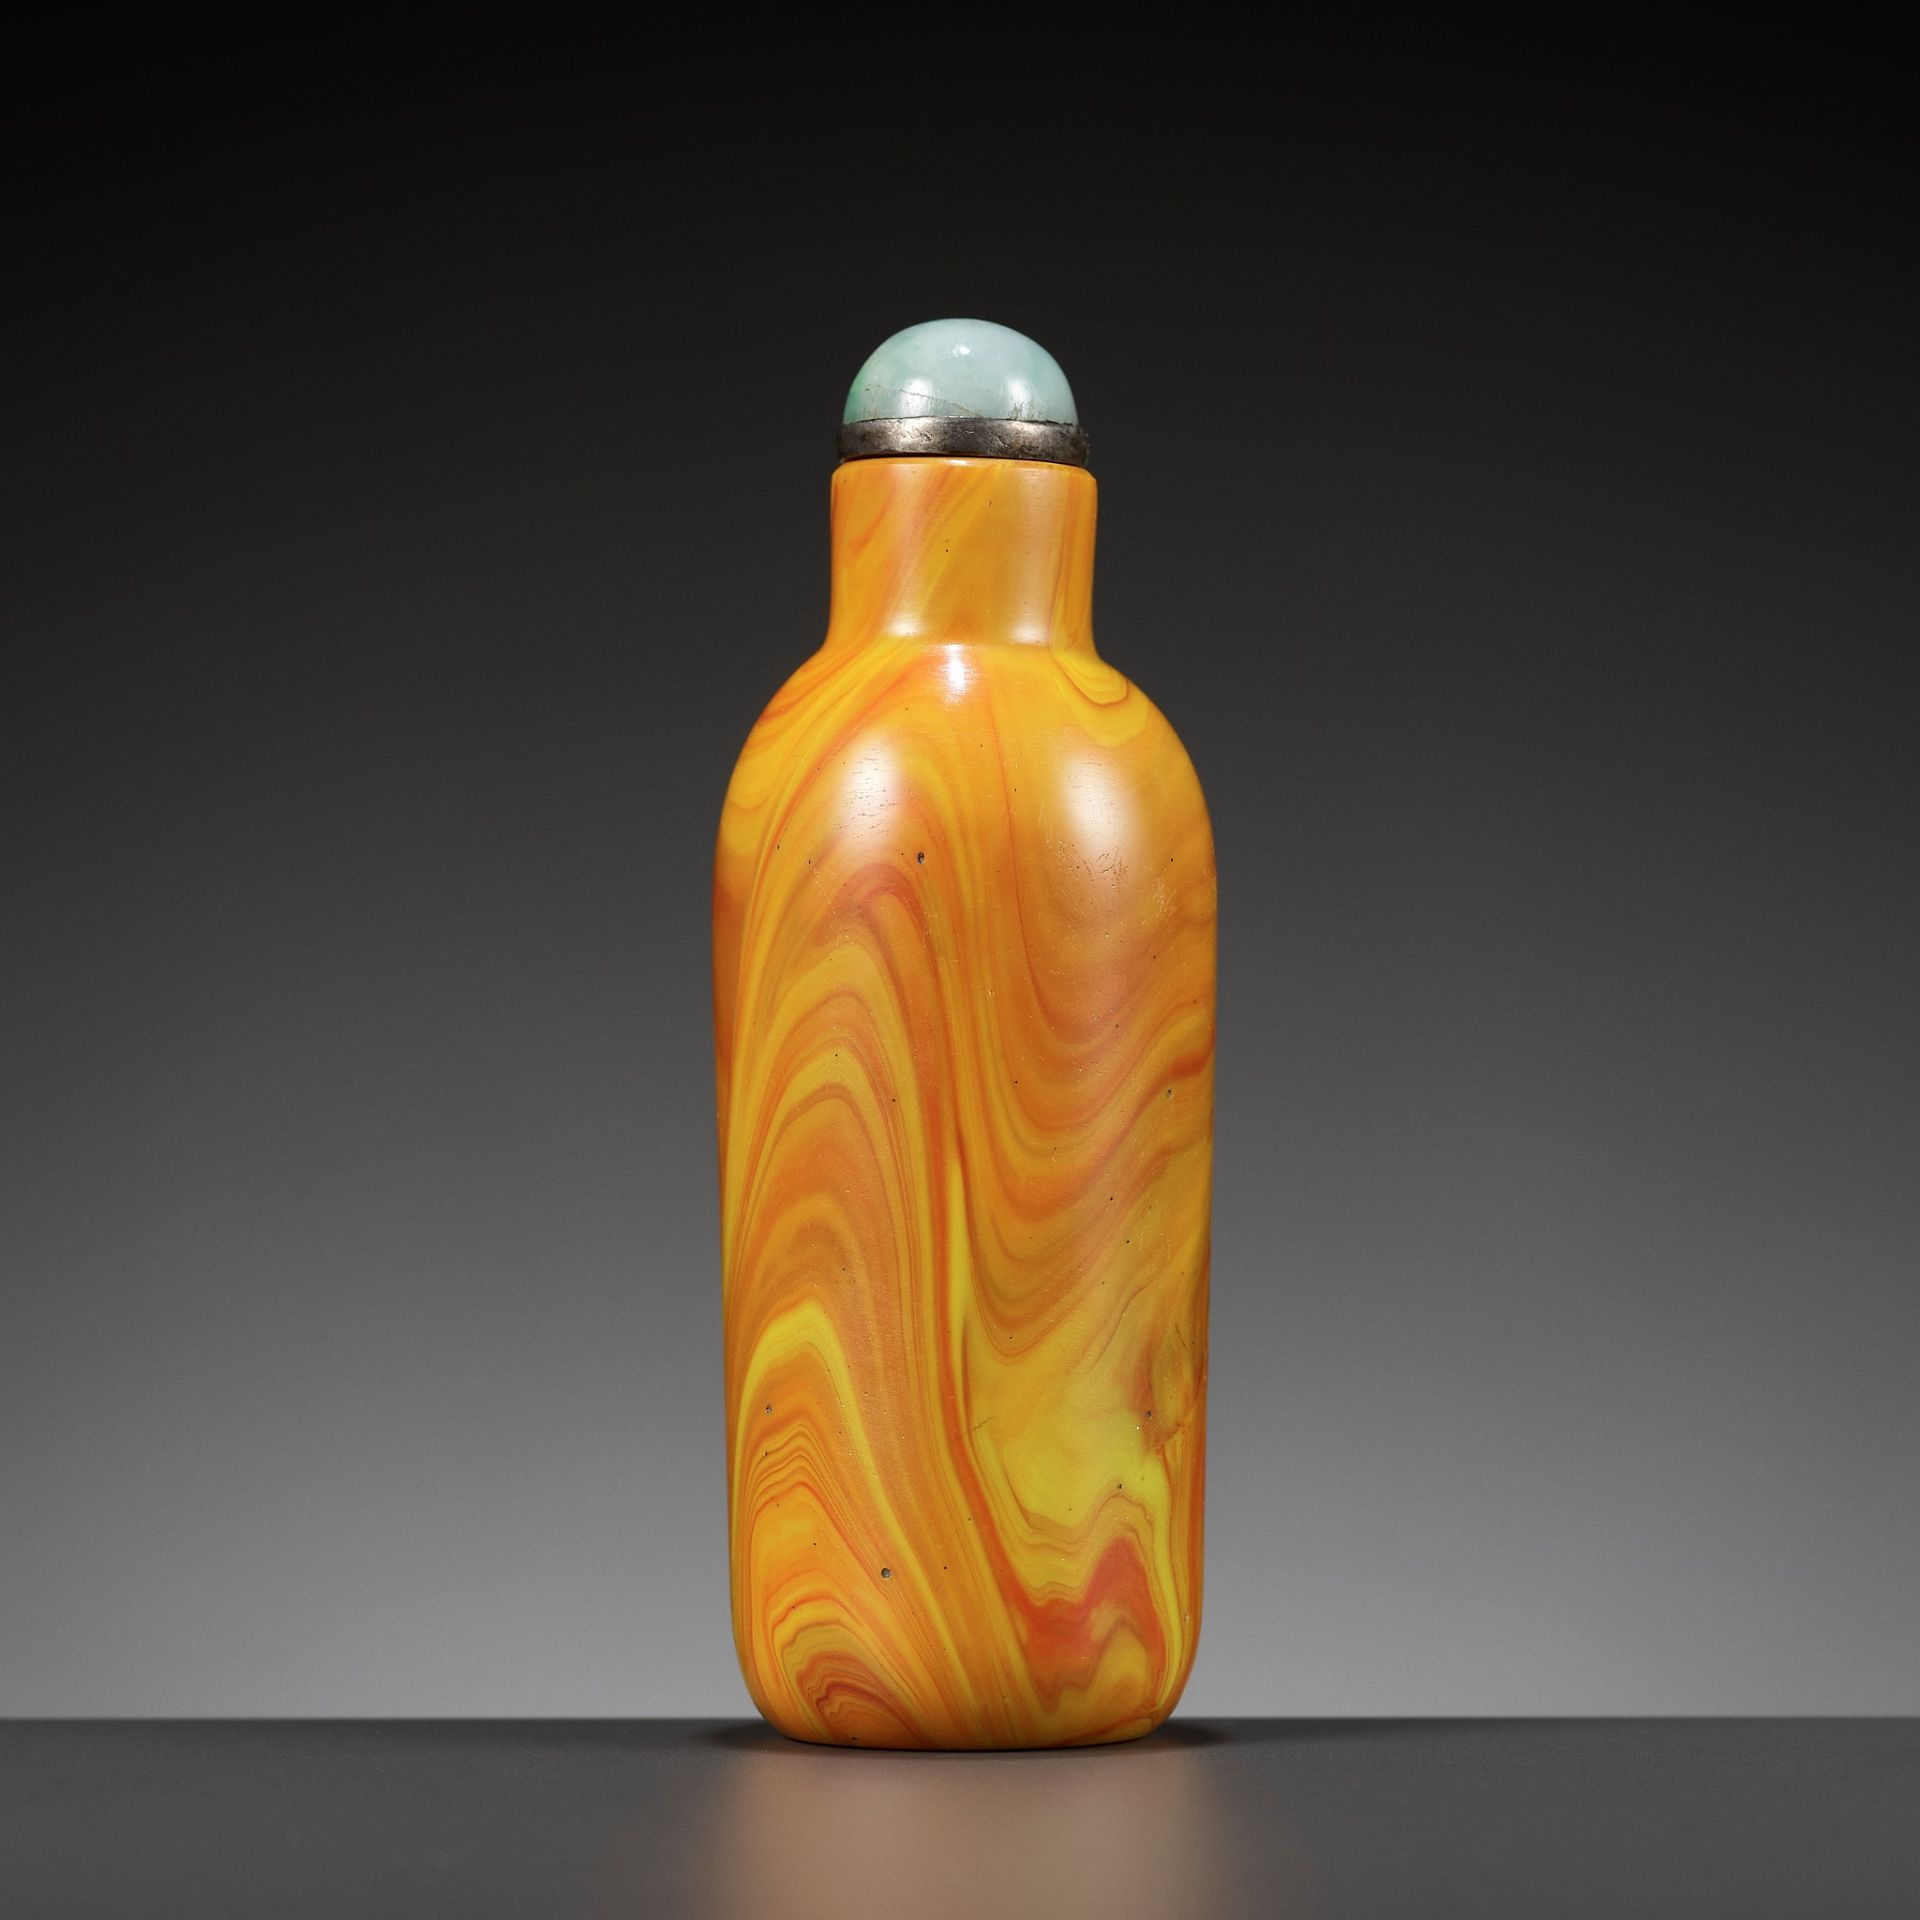 AN IMPERIAL ‘REALGAR’ GLASS SNUFF BOTTLE,ATTRIBUTED TO THE PALACE WORKSHOPS,QIANLONG MARK AND PERIOD